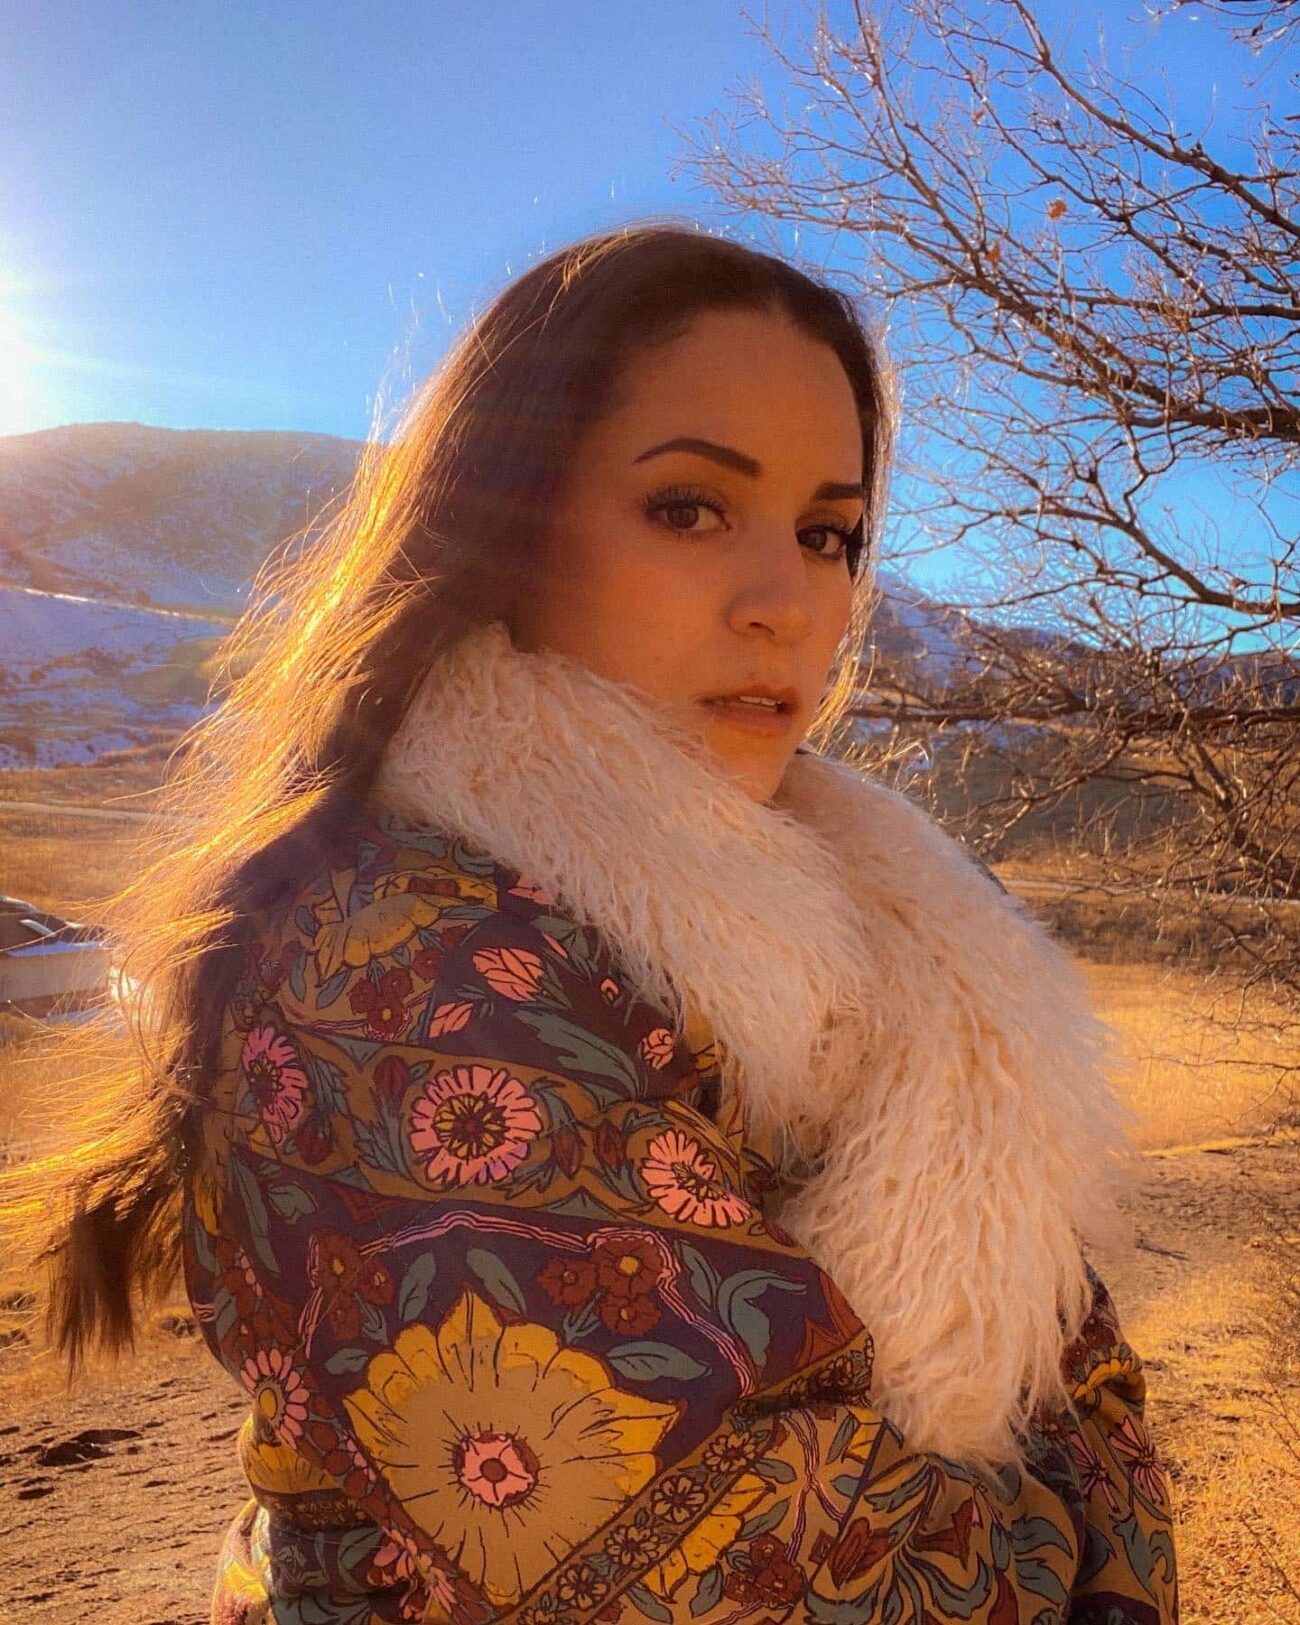 Gina Naomi Baez is the actor, singer, and songwriter behind the must-see stage production 'Rattlesnake Kate'. Get an inside look on Baez's creative process.